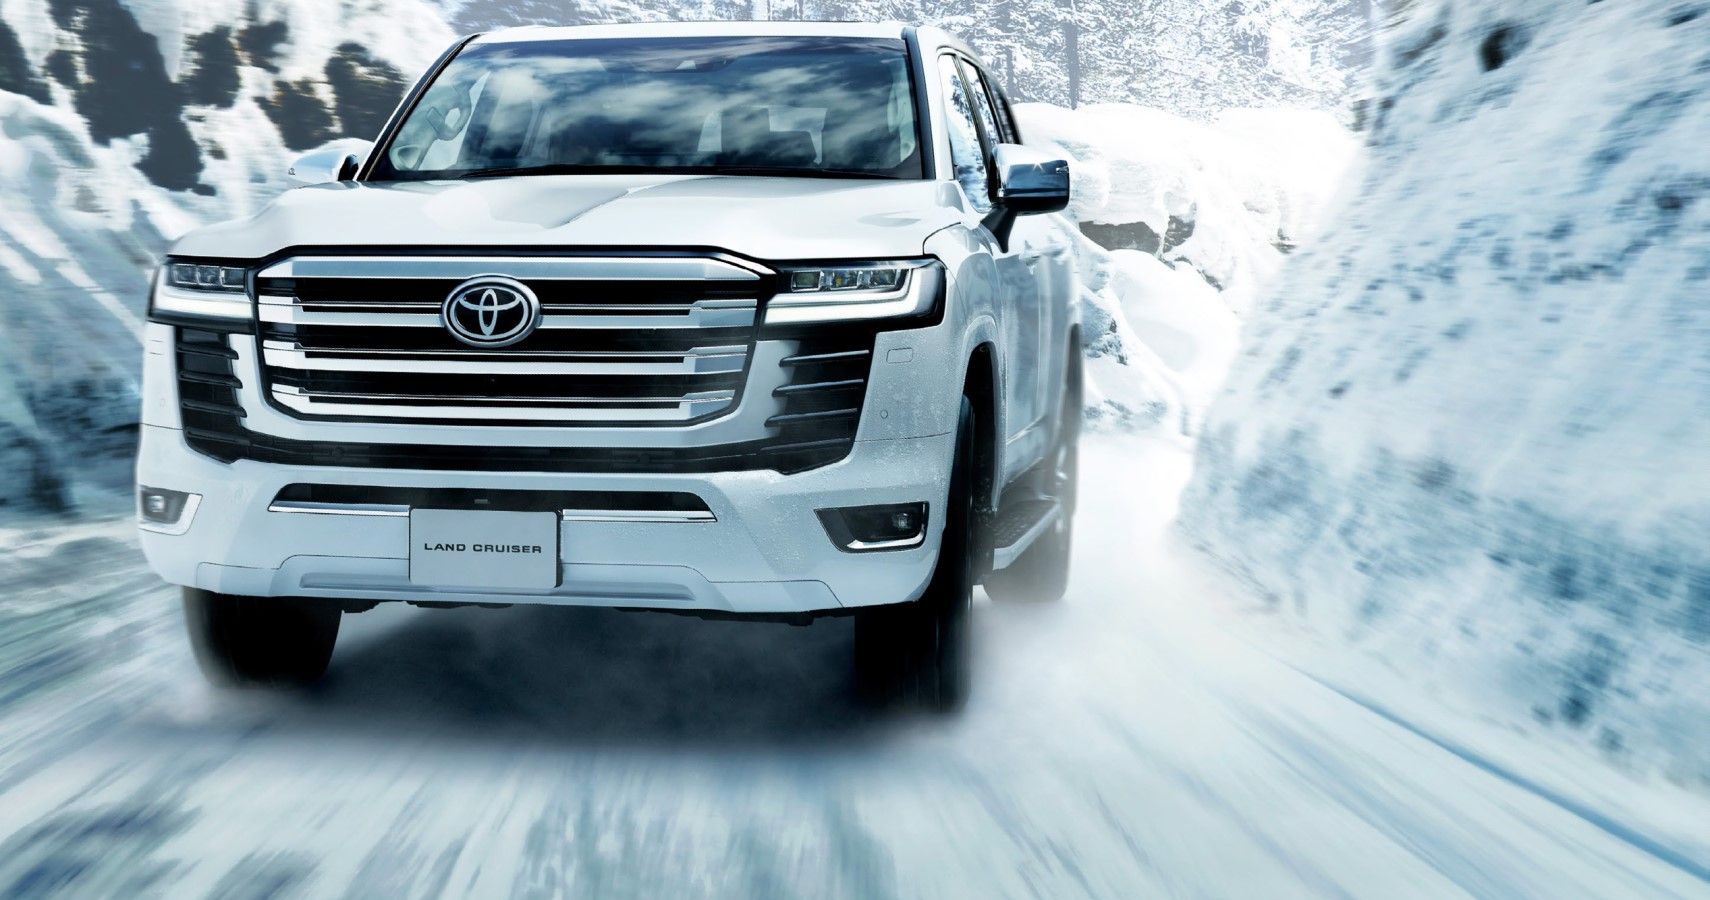 2022 Toyota Land Cruiser front view in snow